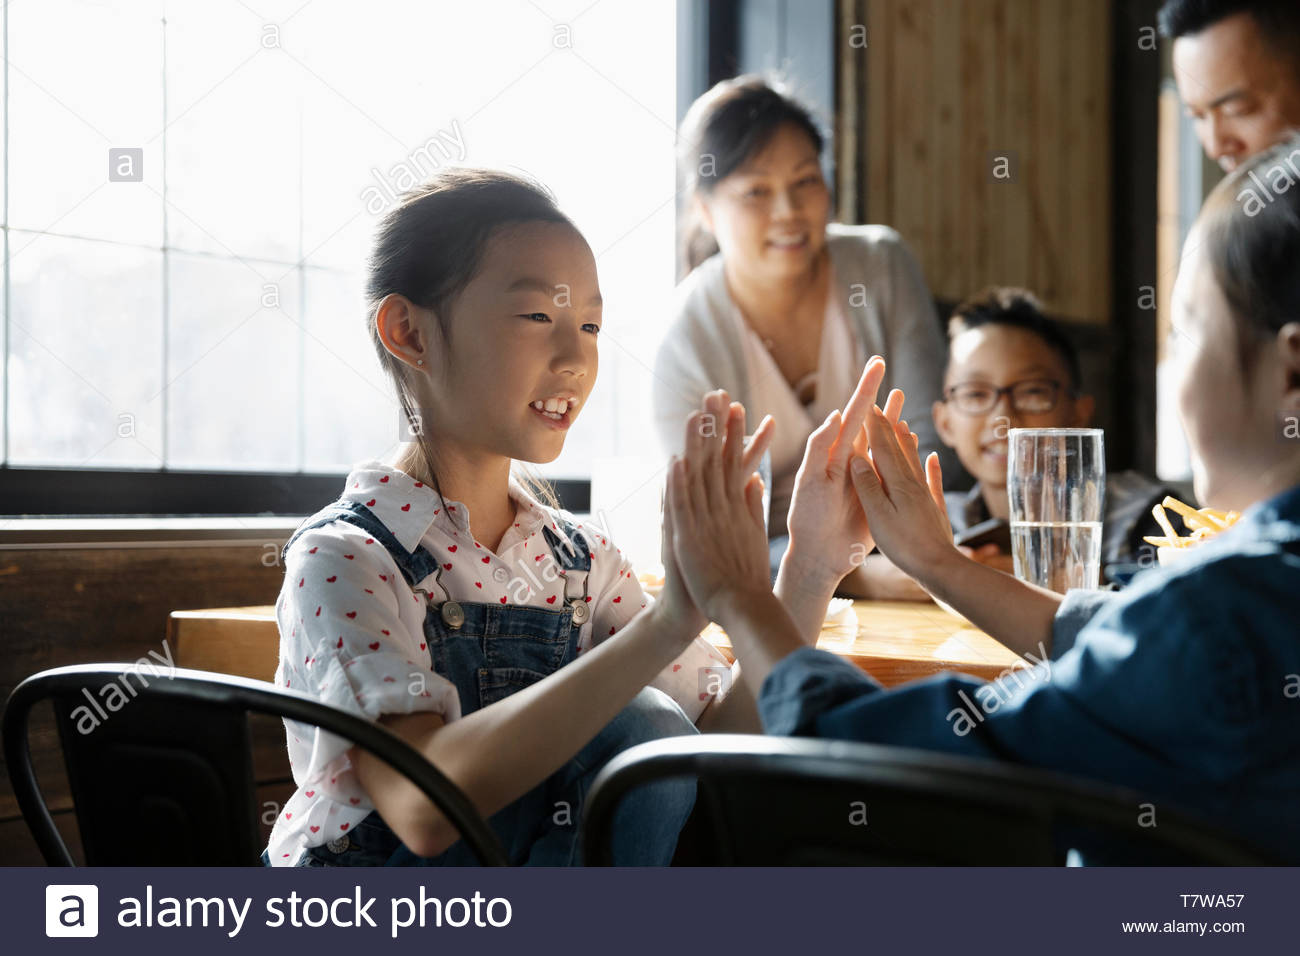 Sisters playing clapping game in restaurant Stock Photo